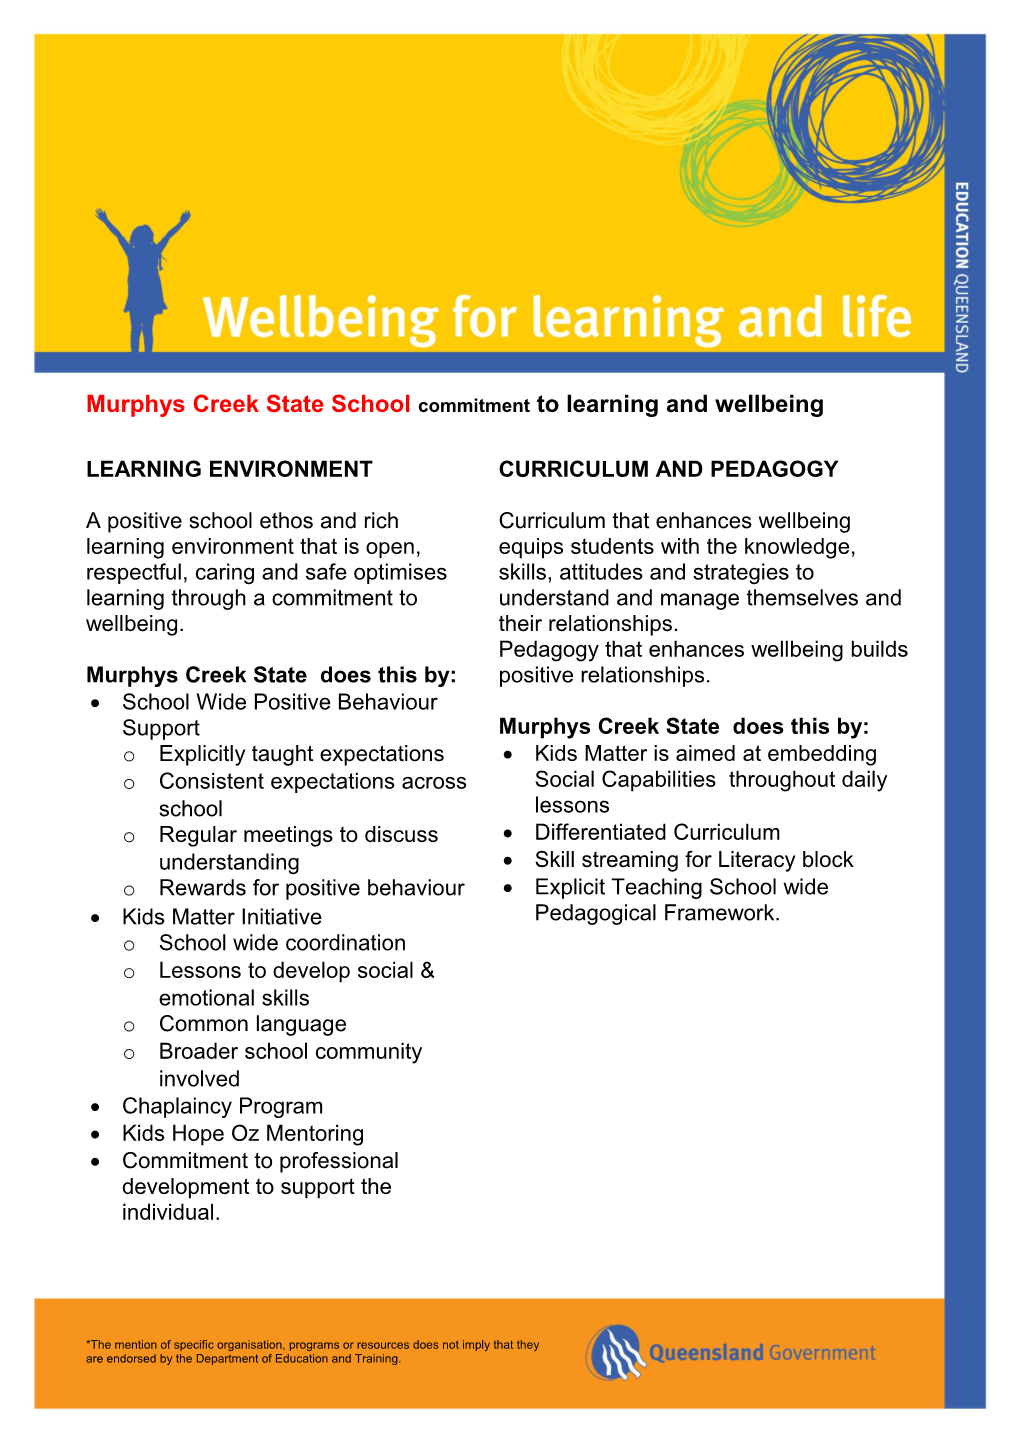 Murphys Creek State School Commitment to Learning and Wellbeing